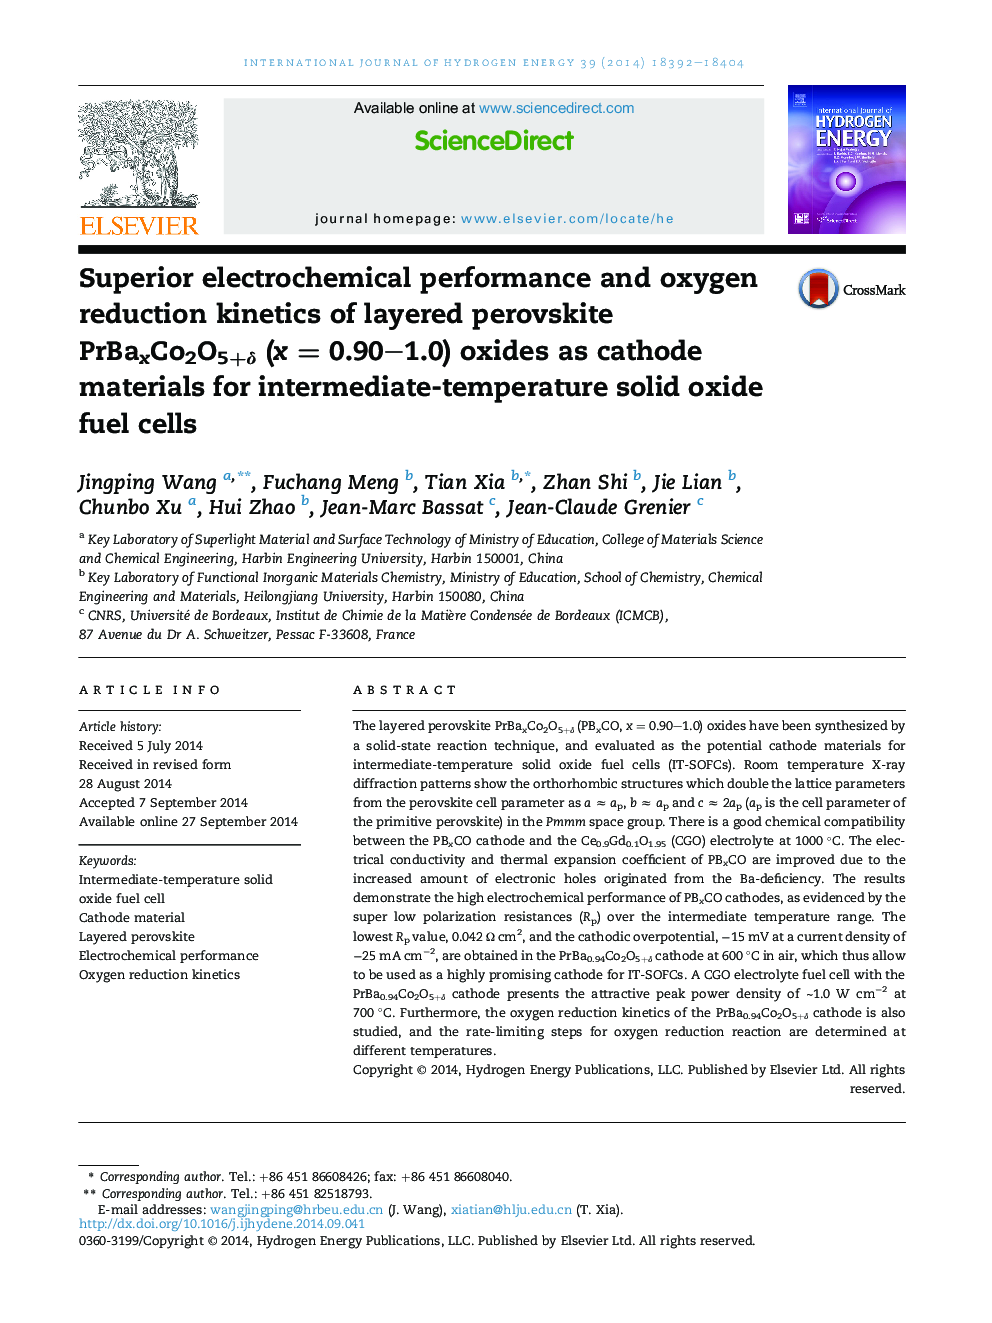 Superior electrochemical performance and oxygen reduction kinetics of layered perovskite PrBaxCo2O5+δ (x = 0.90–1.0) oxides as cathode materials for intermediate-temperature solid oxide fuel cells